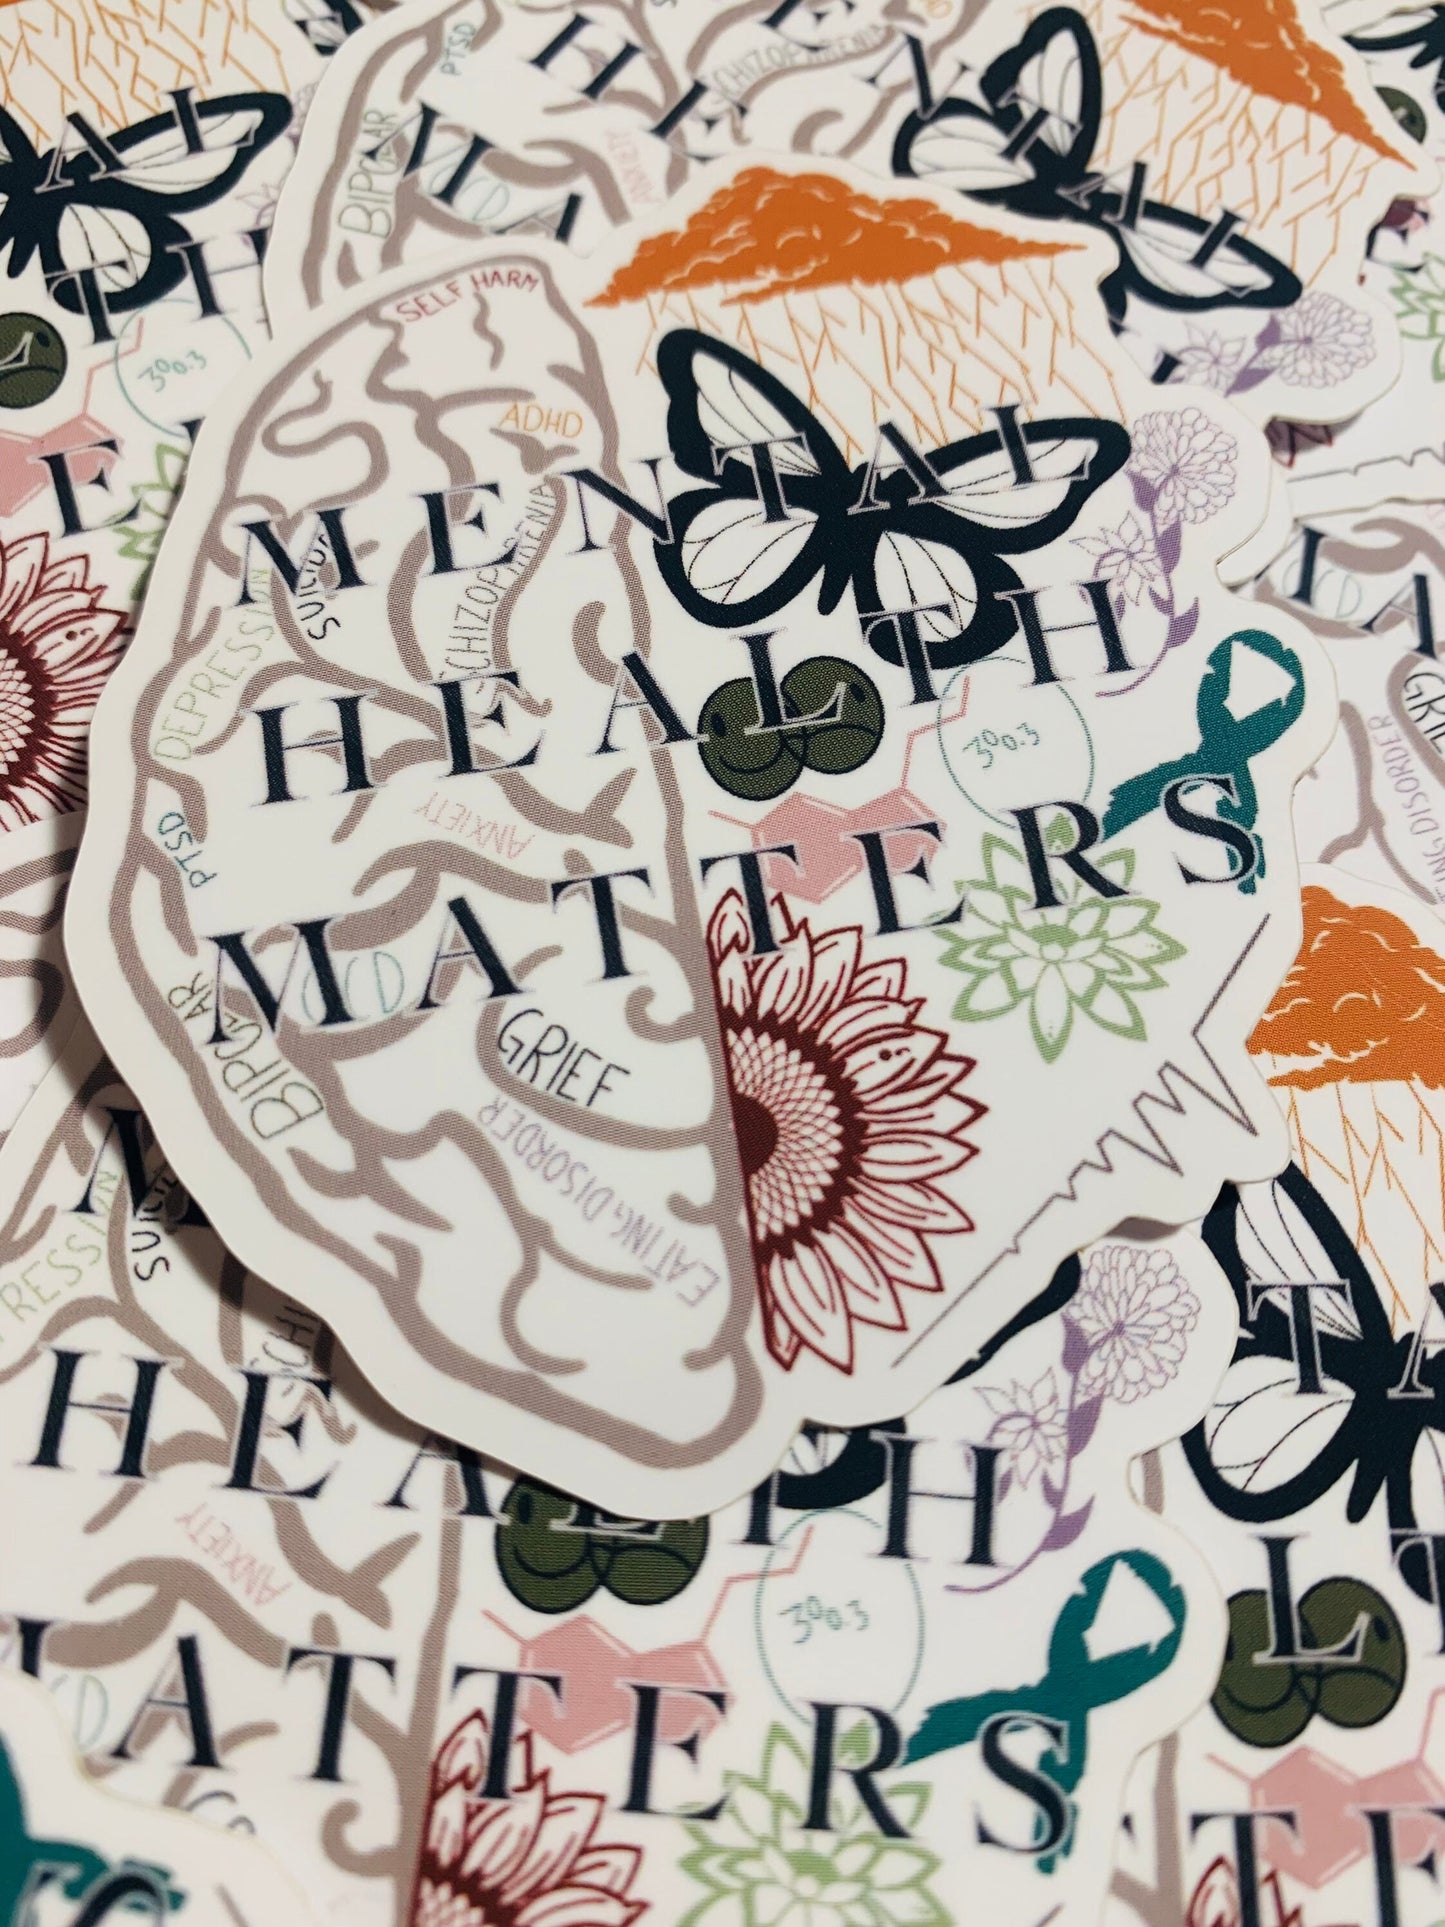 Mental health stickers